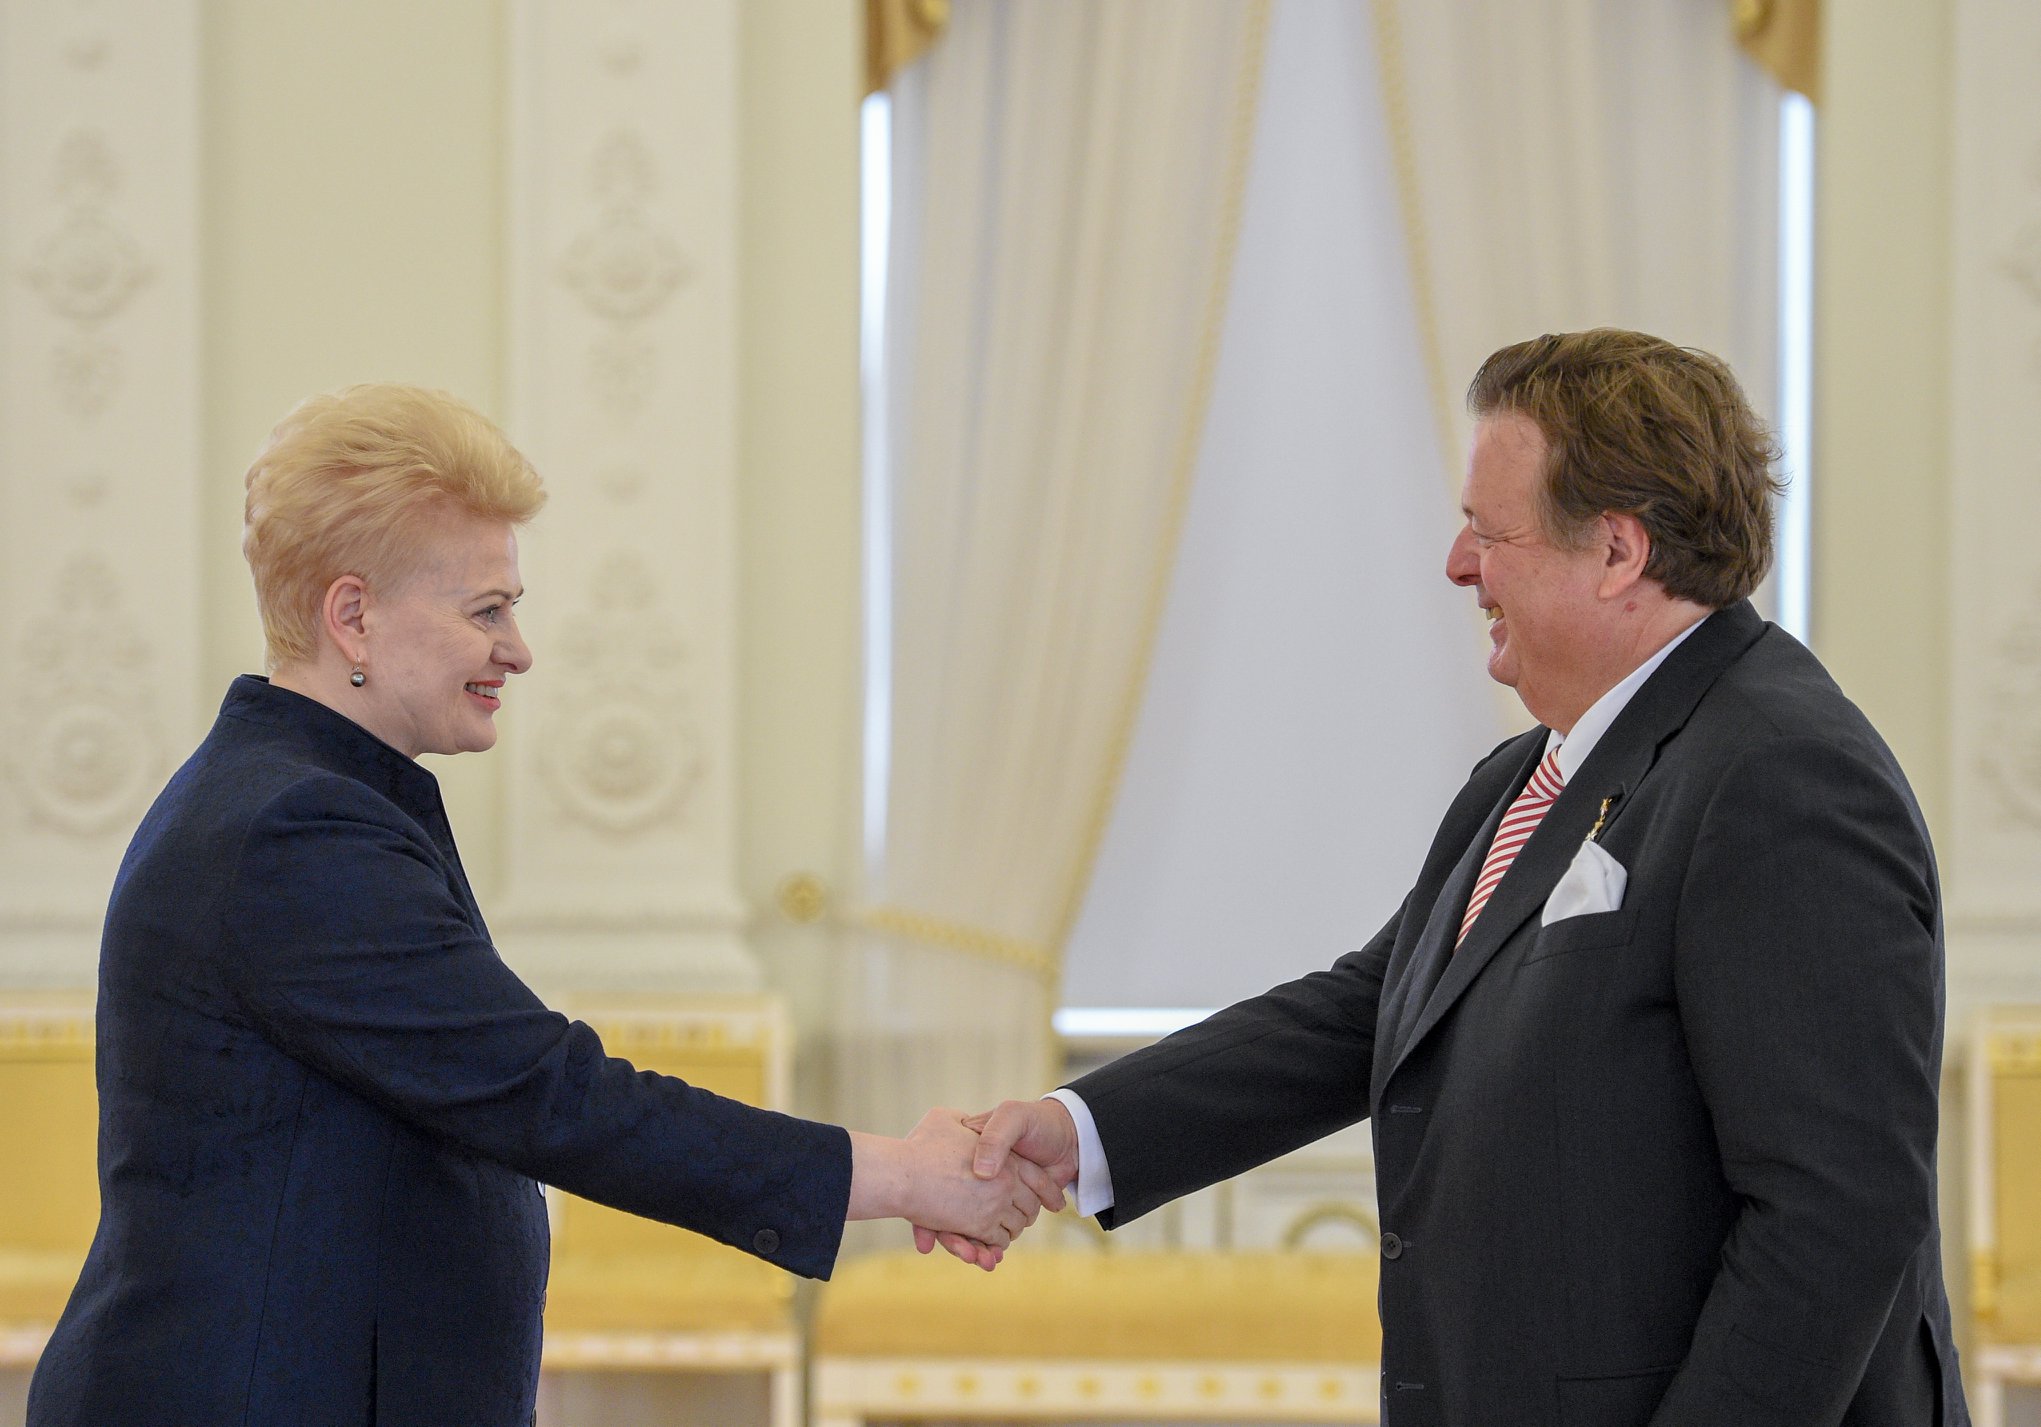 The President of Lithuania received letters of credence from the Order of Malta’s ambassador